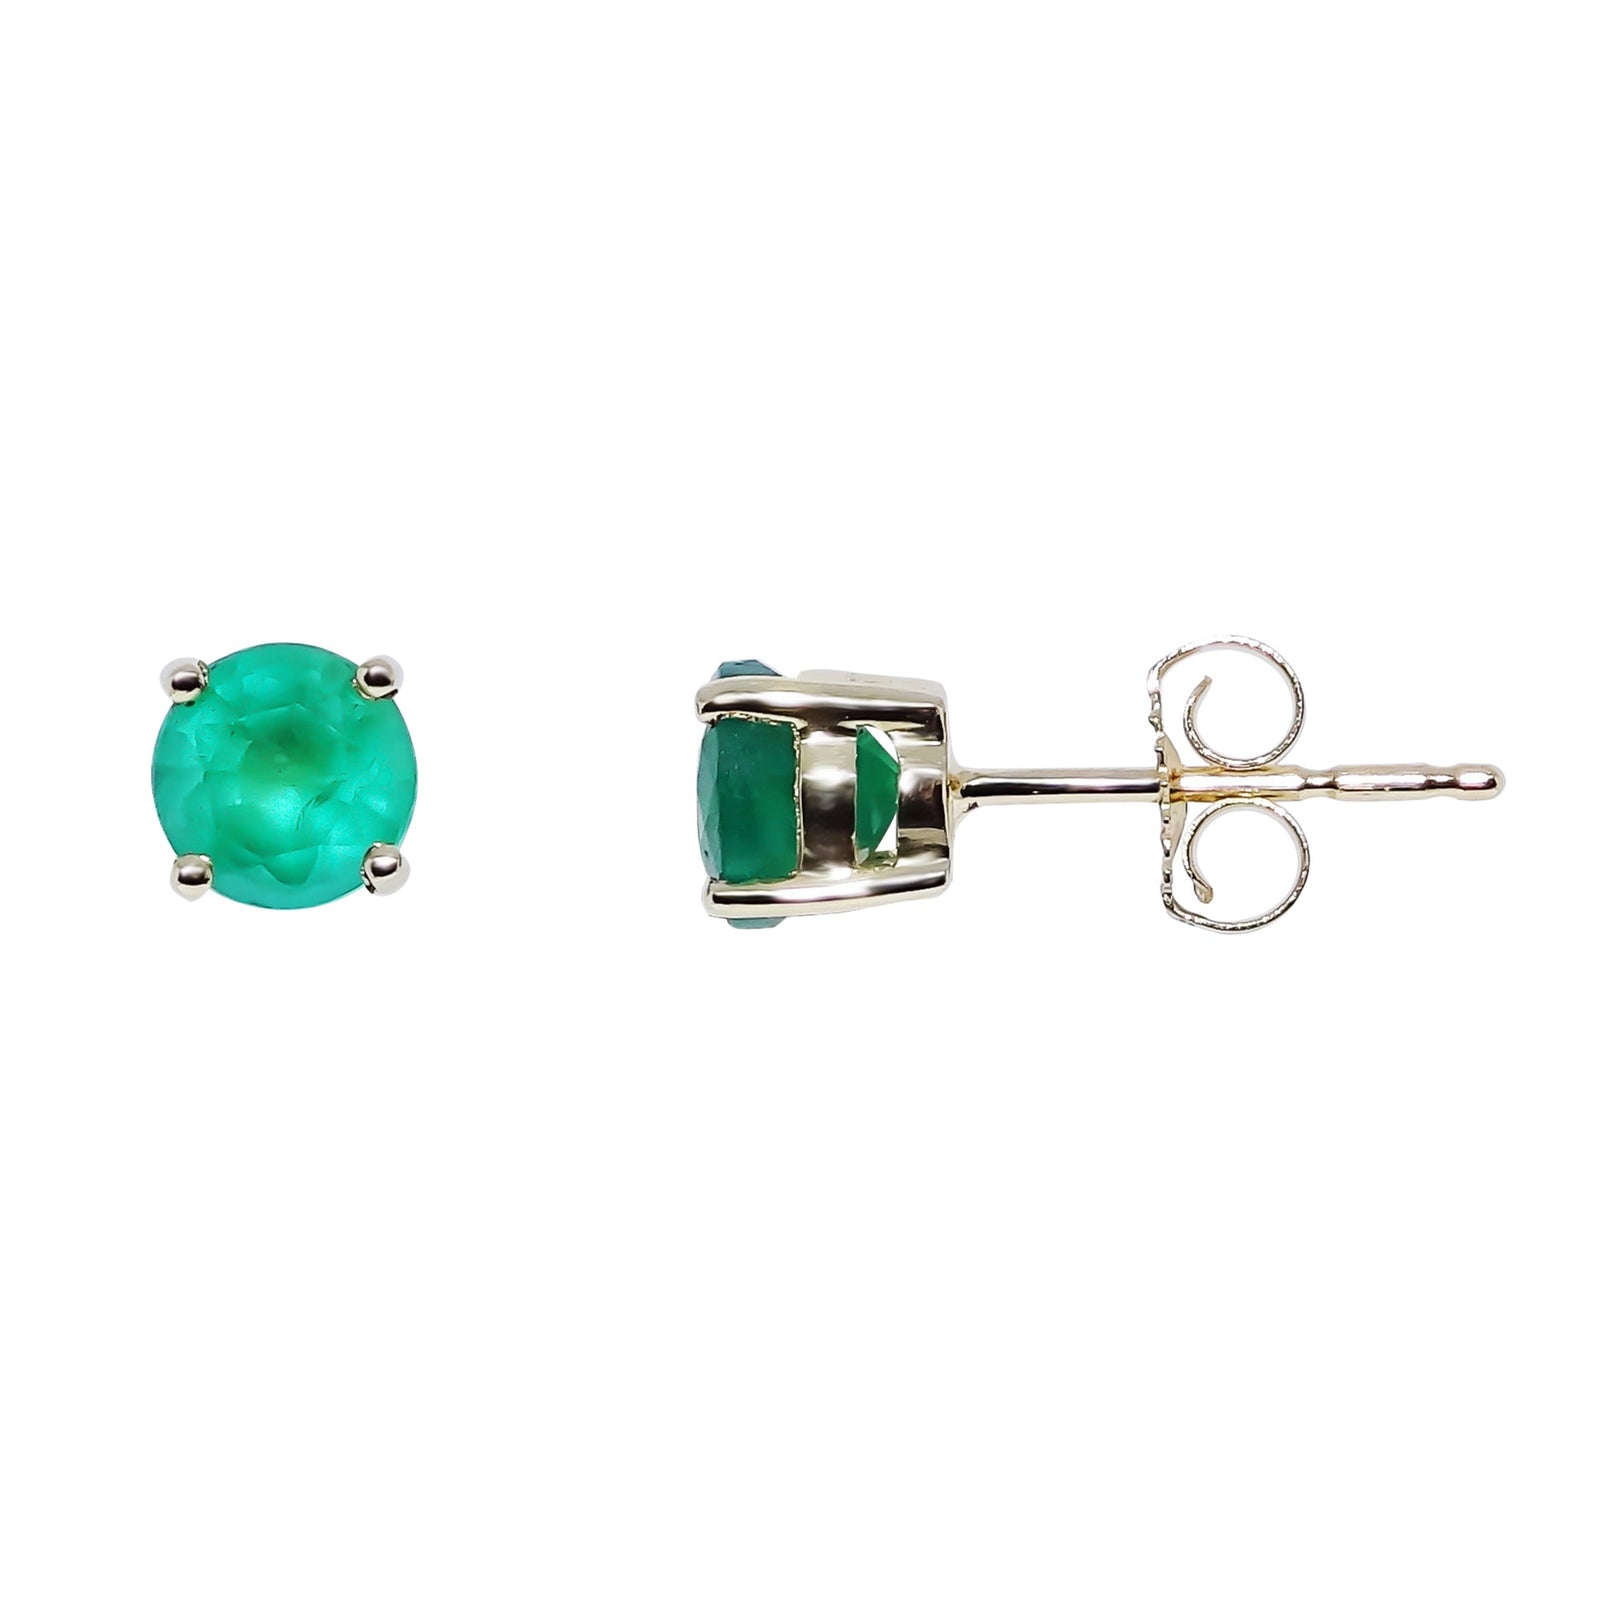 9ct gold 5mm round emerald stud earrings